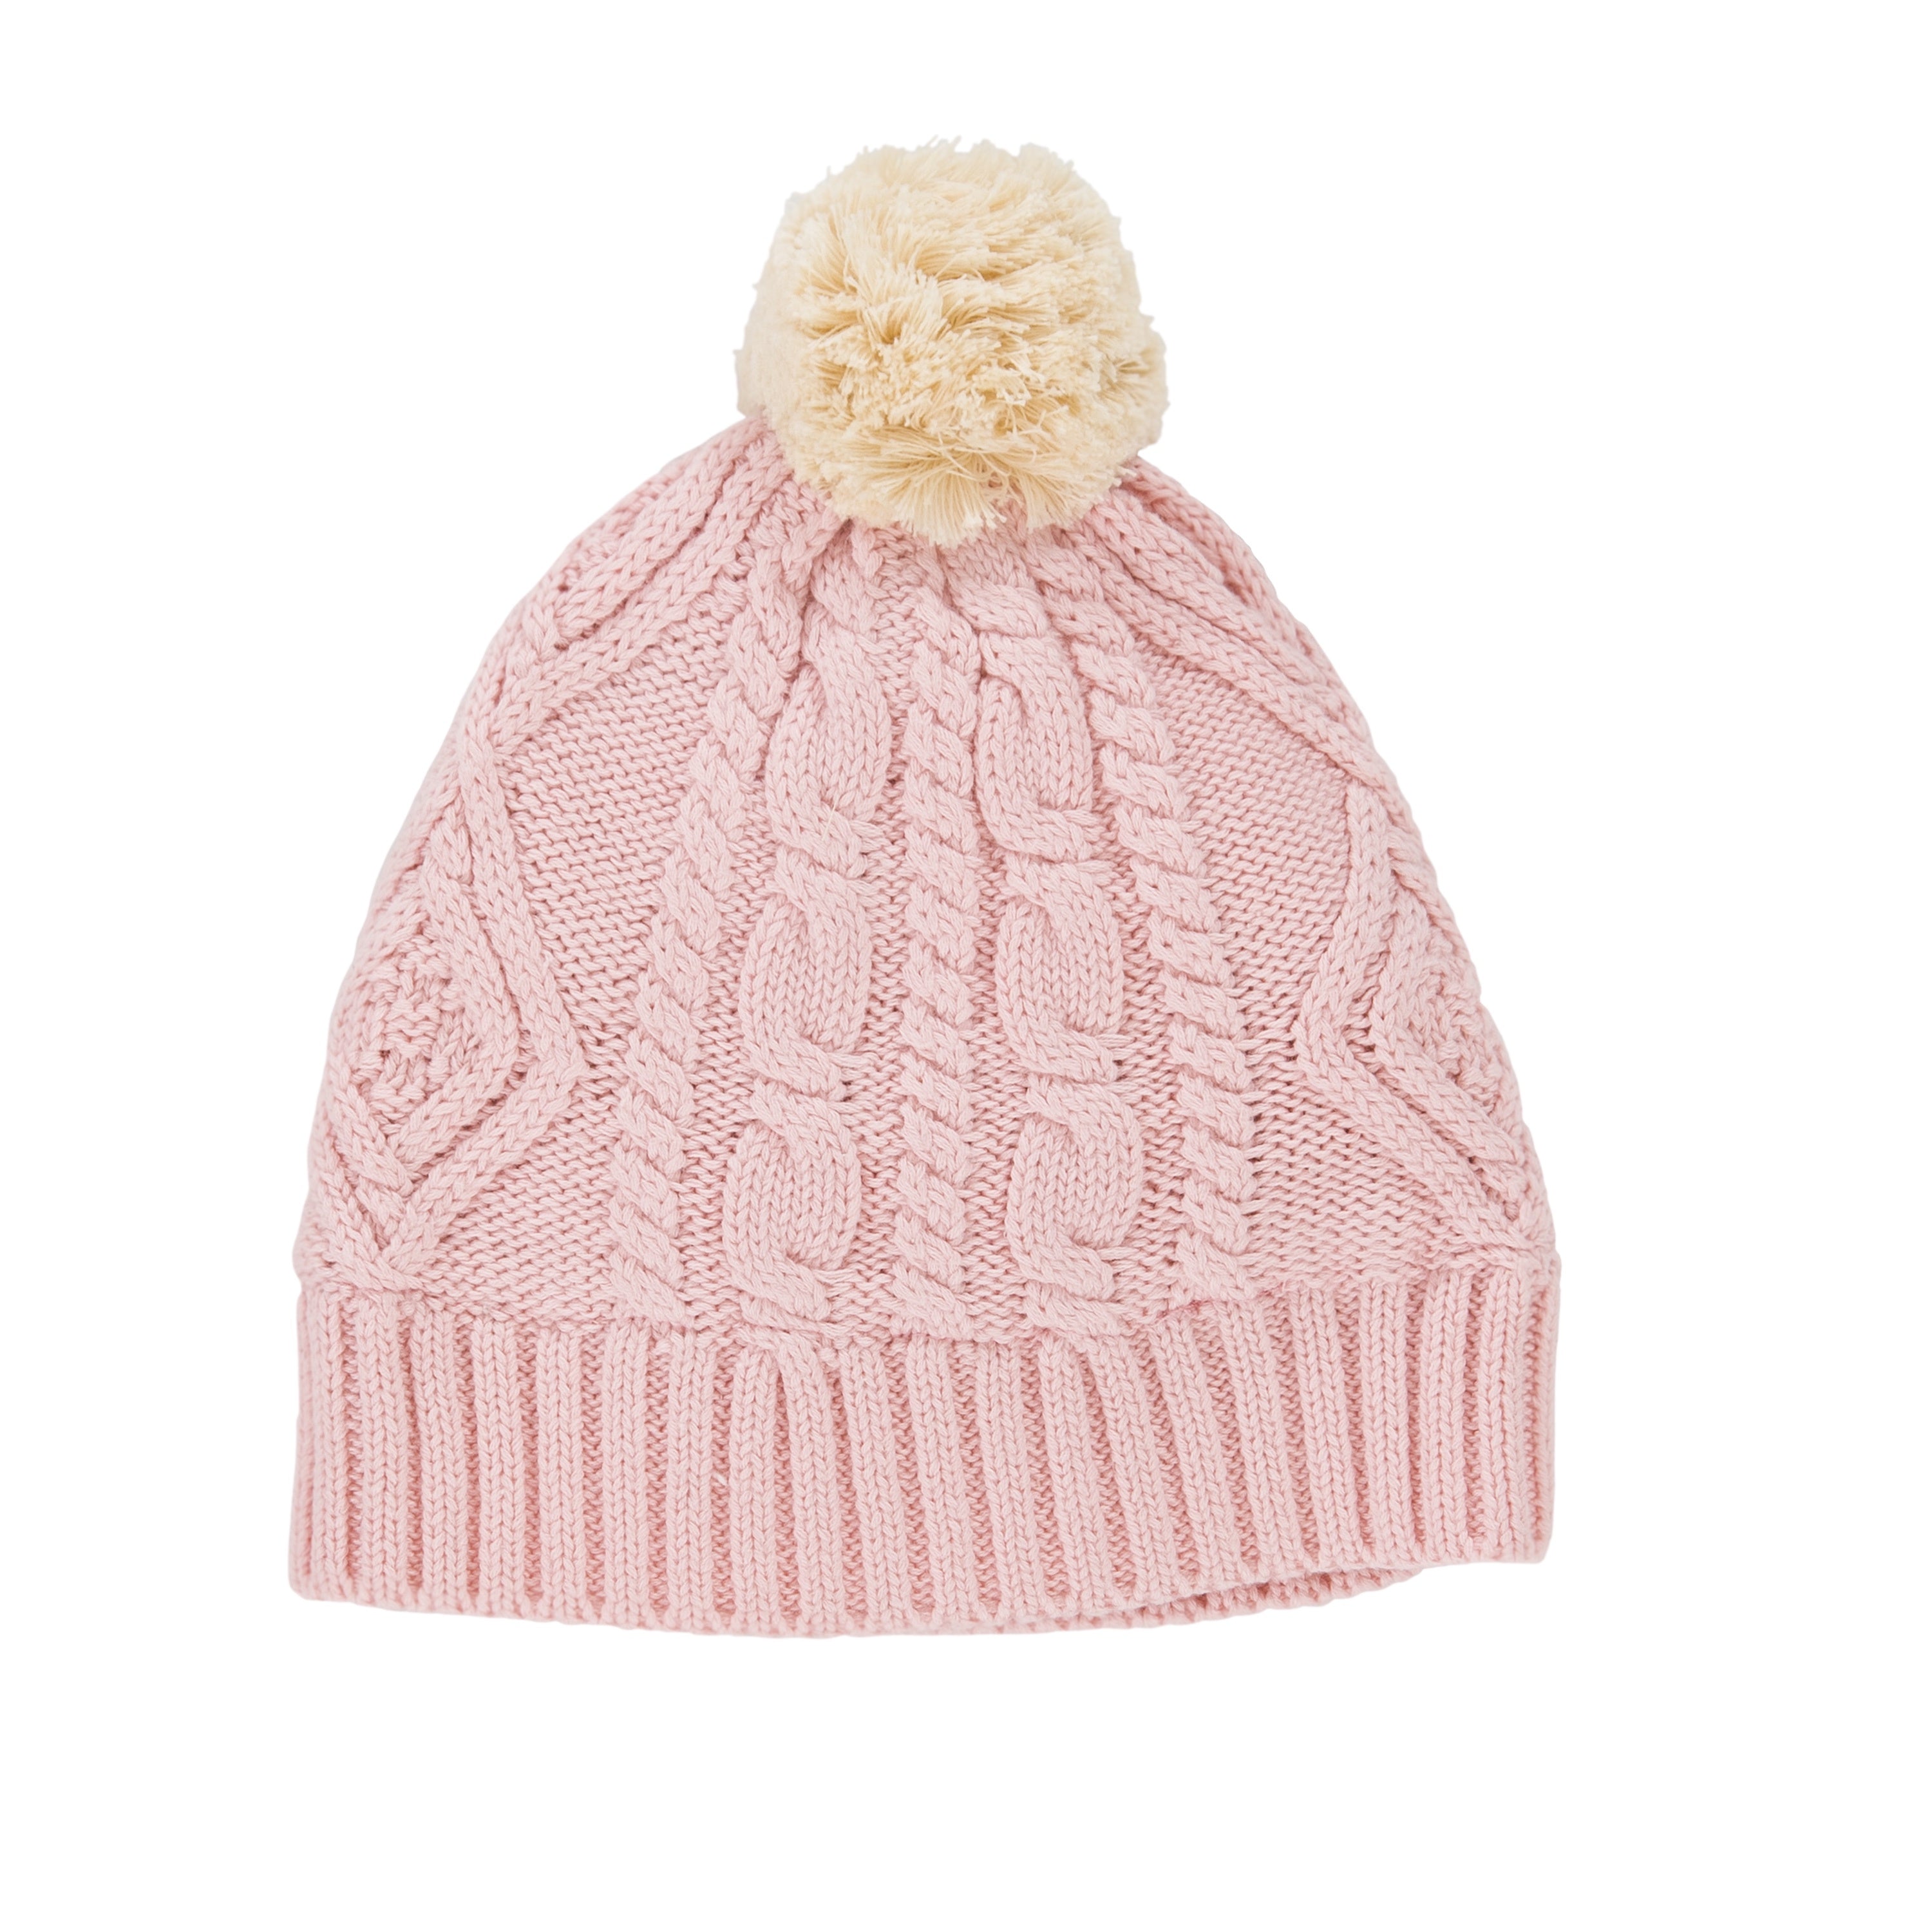 Acorn - Cable Knit Beanie - Pink & Cream